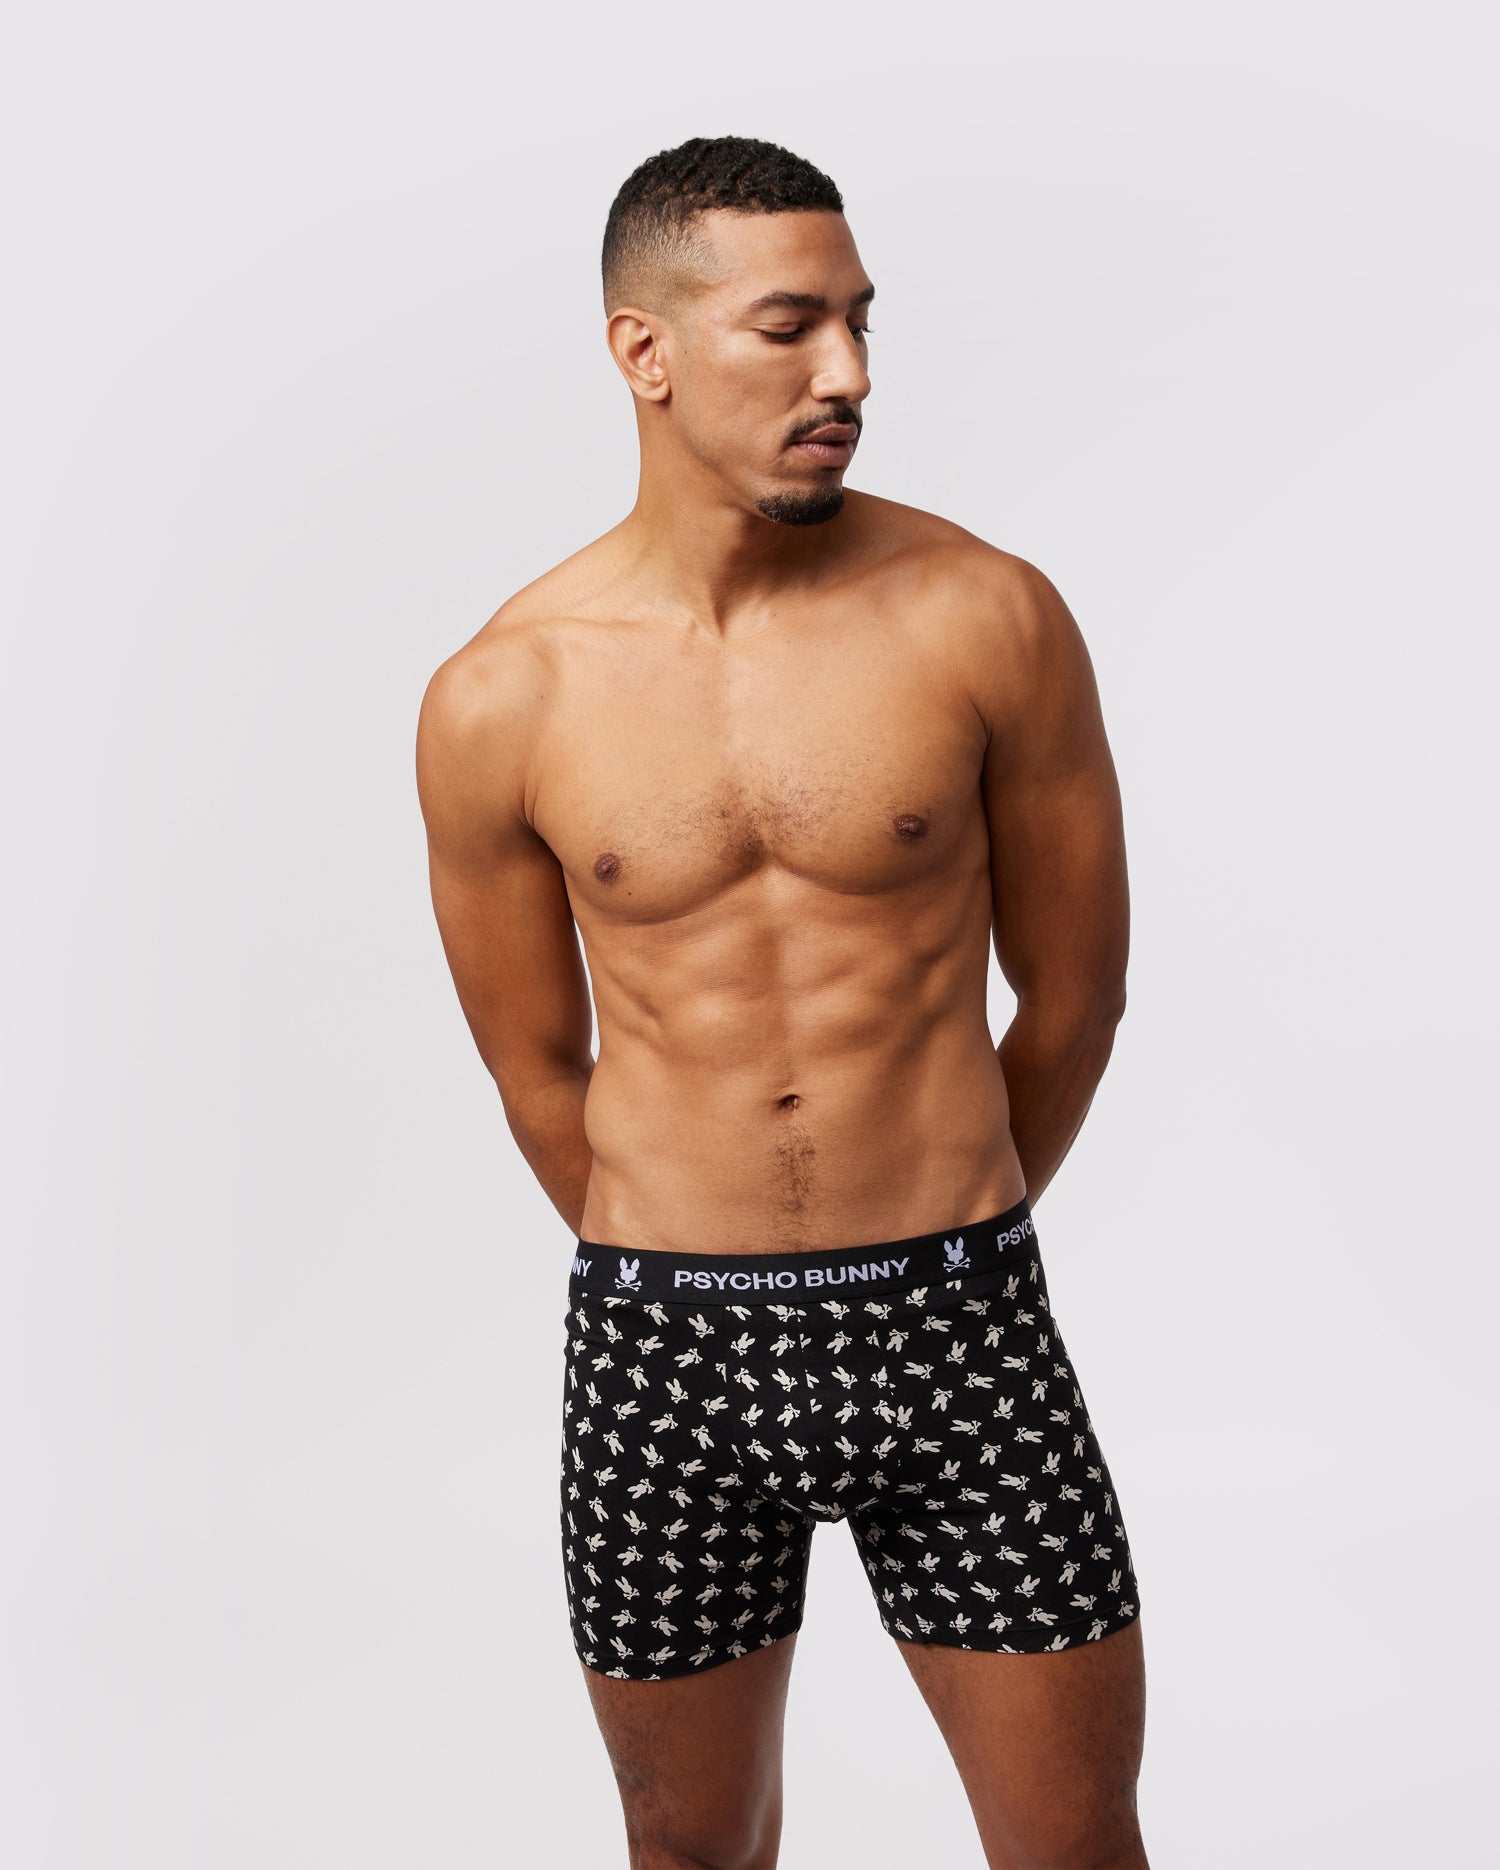 Lounge Underwear Us: This Month's Bestsellers